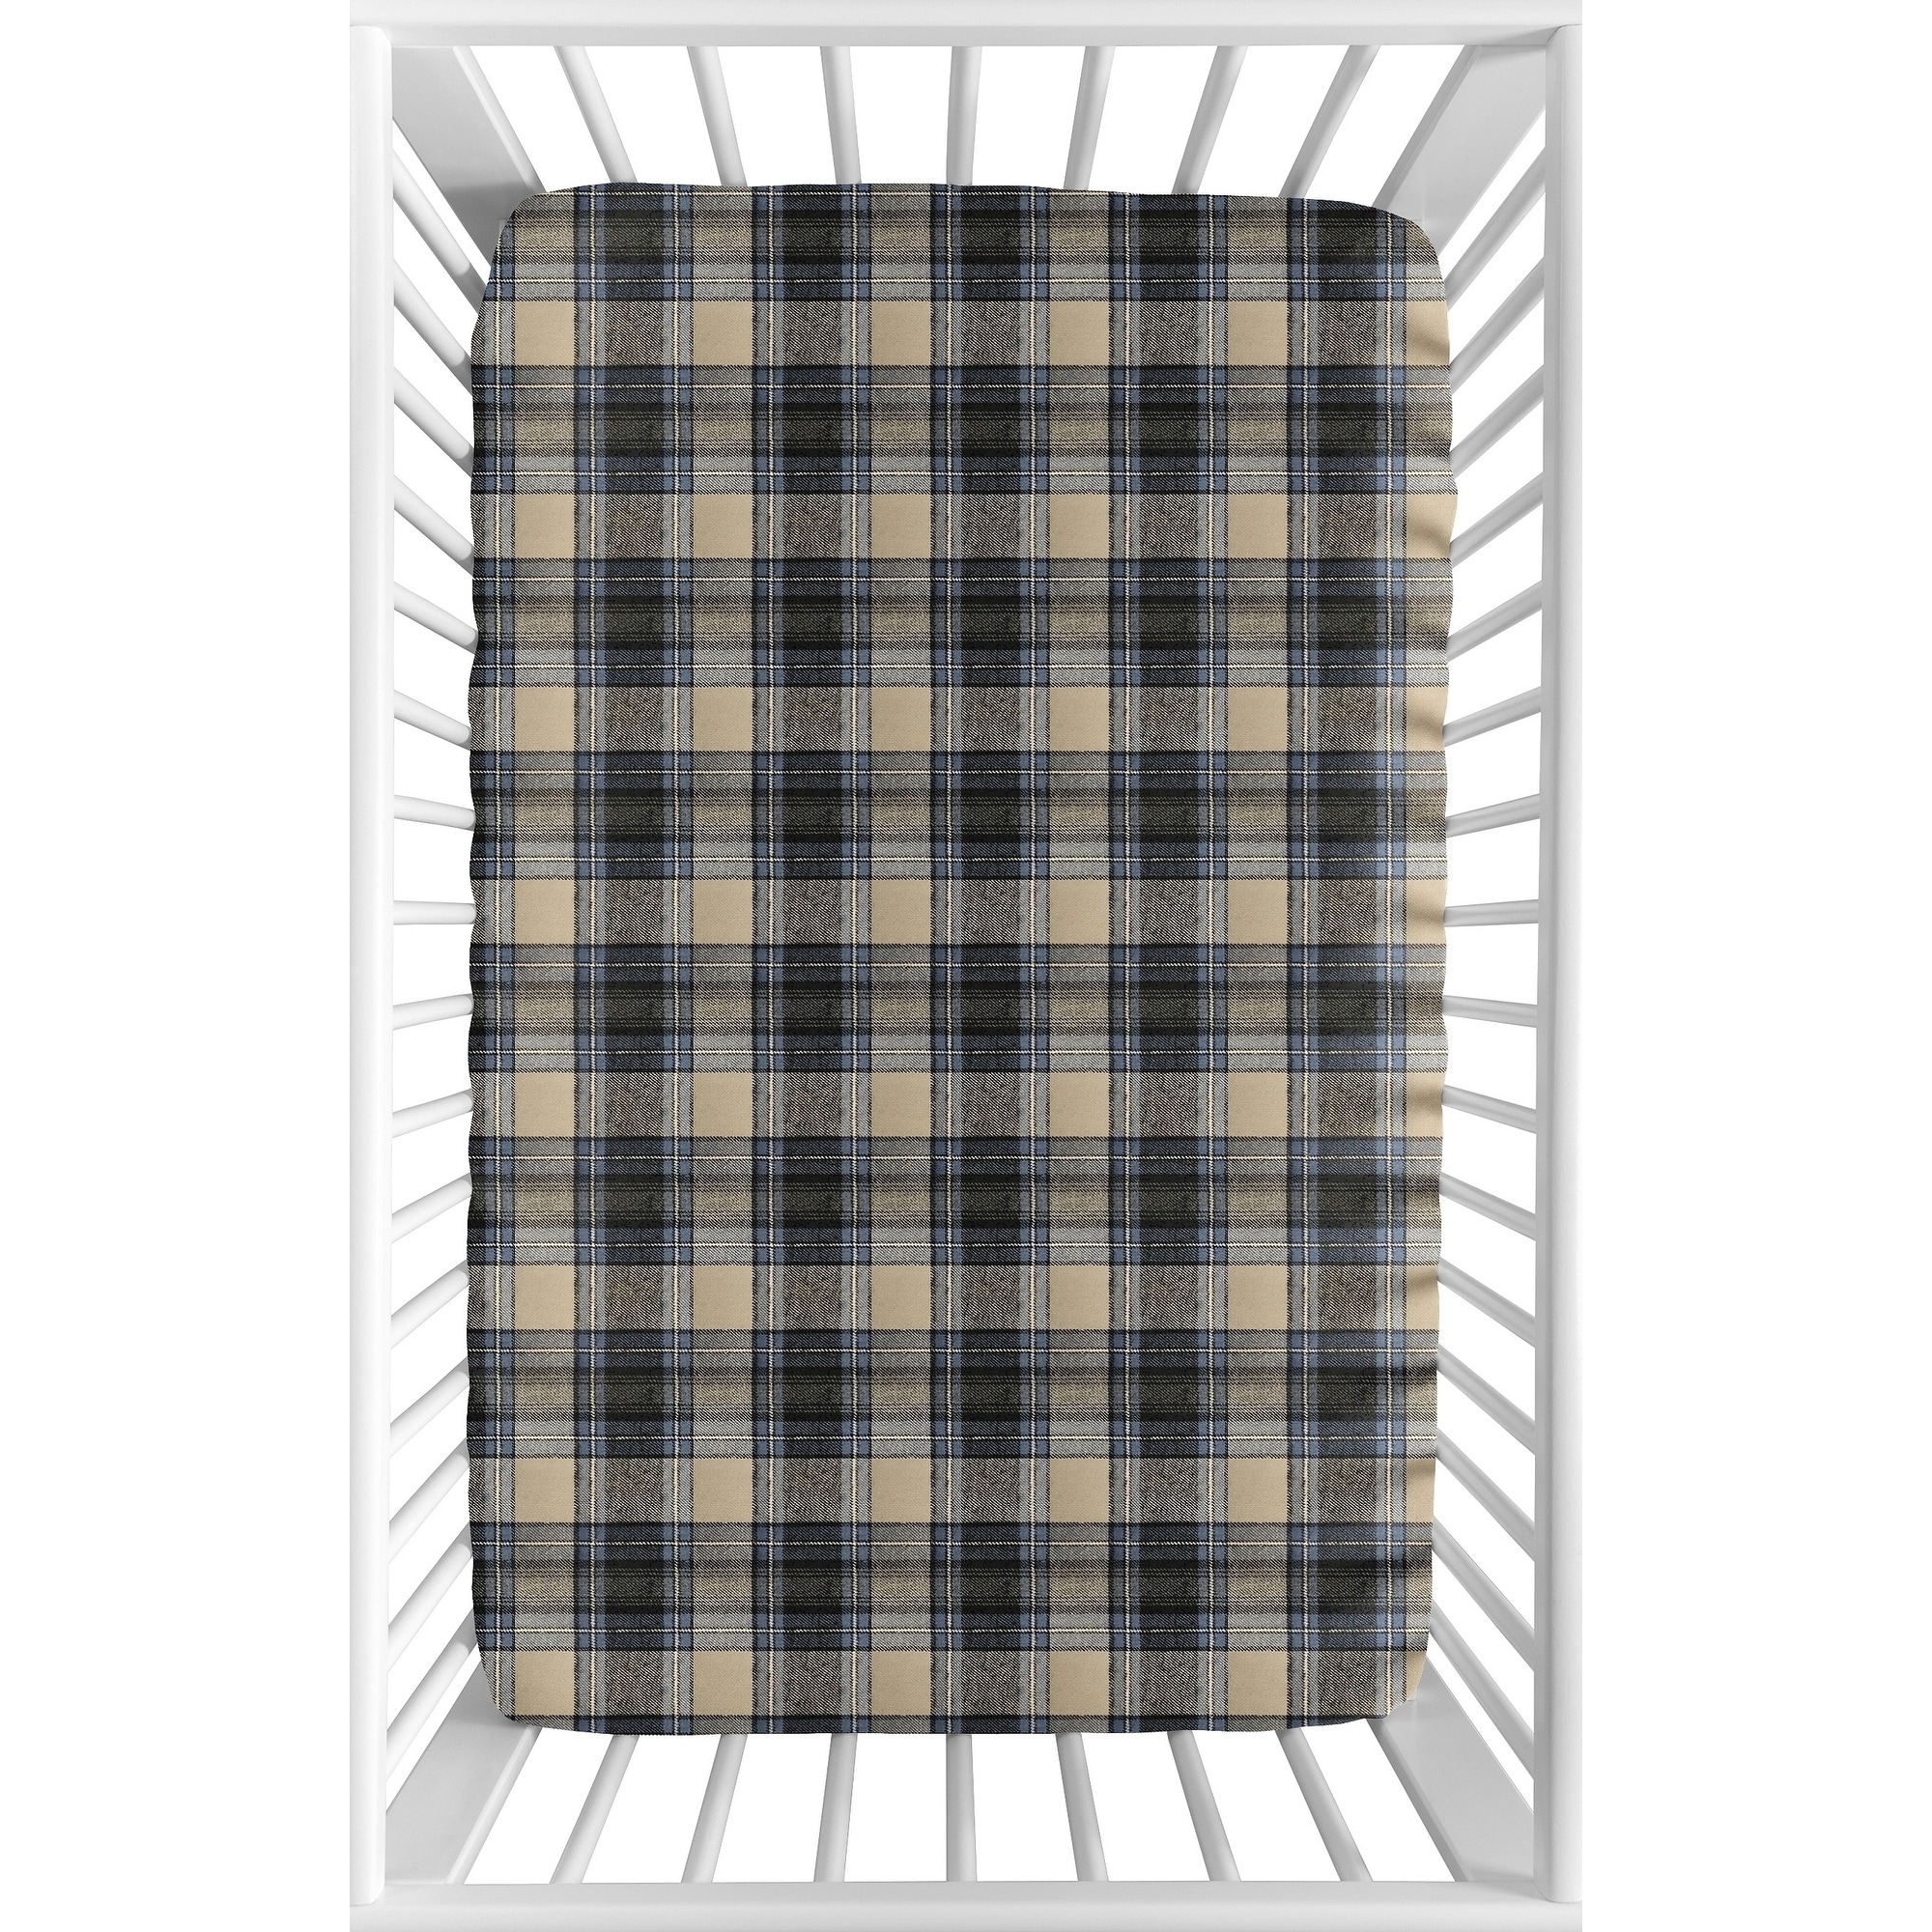 flannel sheets for cribs